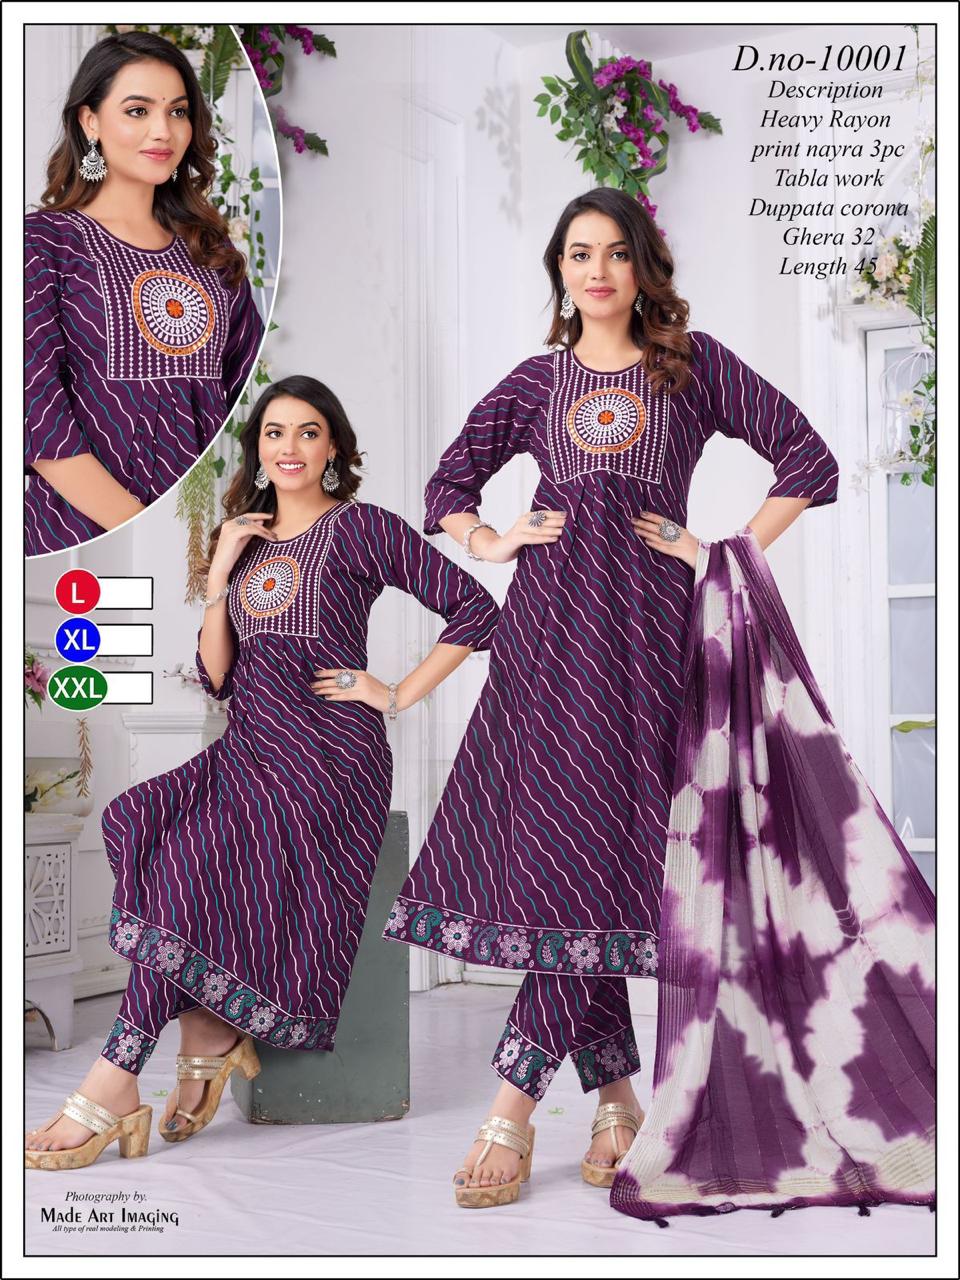 Nayra Cut 1707 Globe Heavy Rayon Readymade Pant Style Suits Exporter